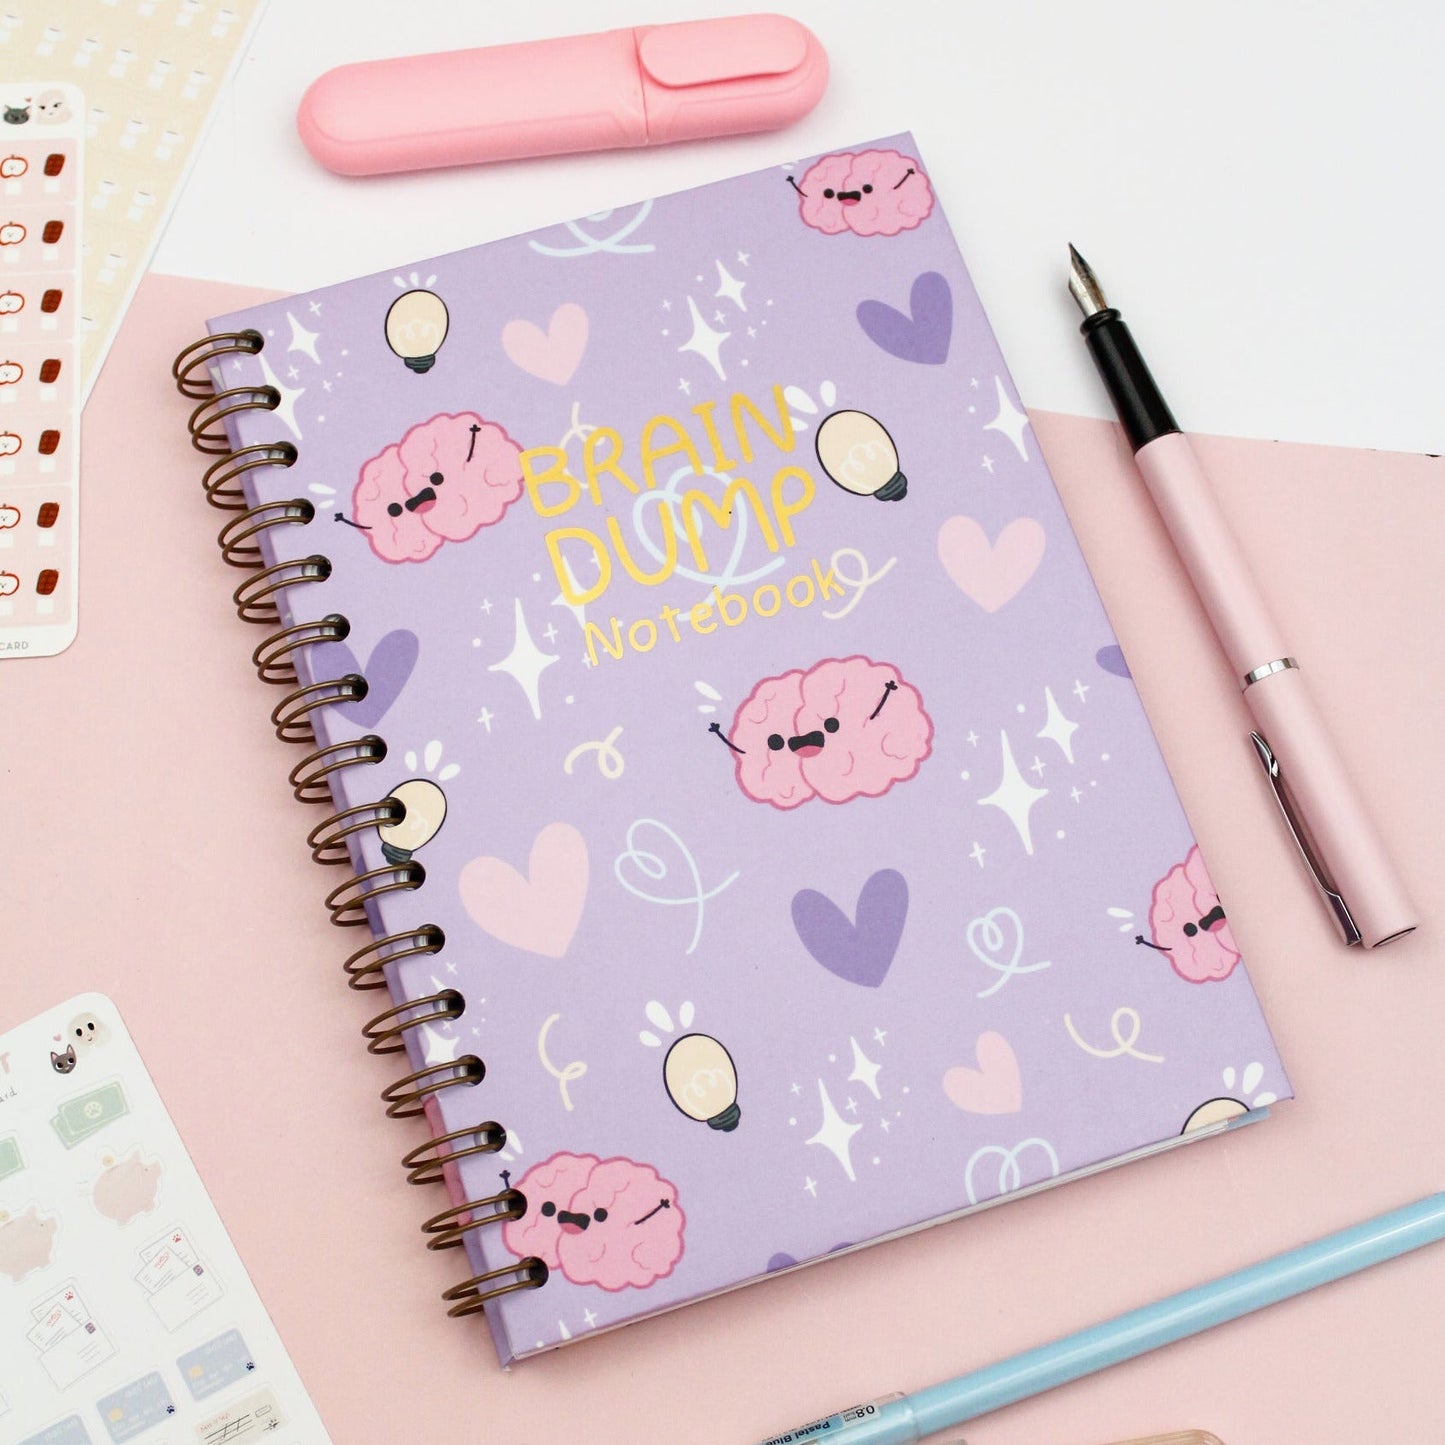 kawaii notebook with purple covers and cute brains